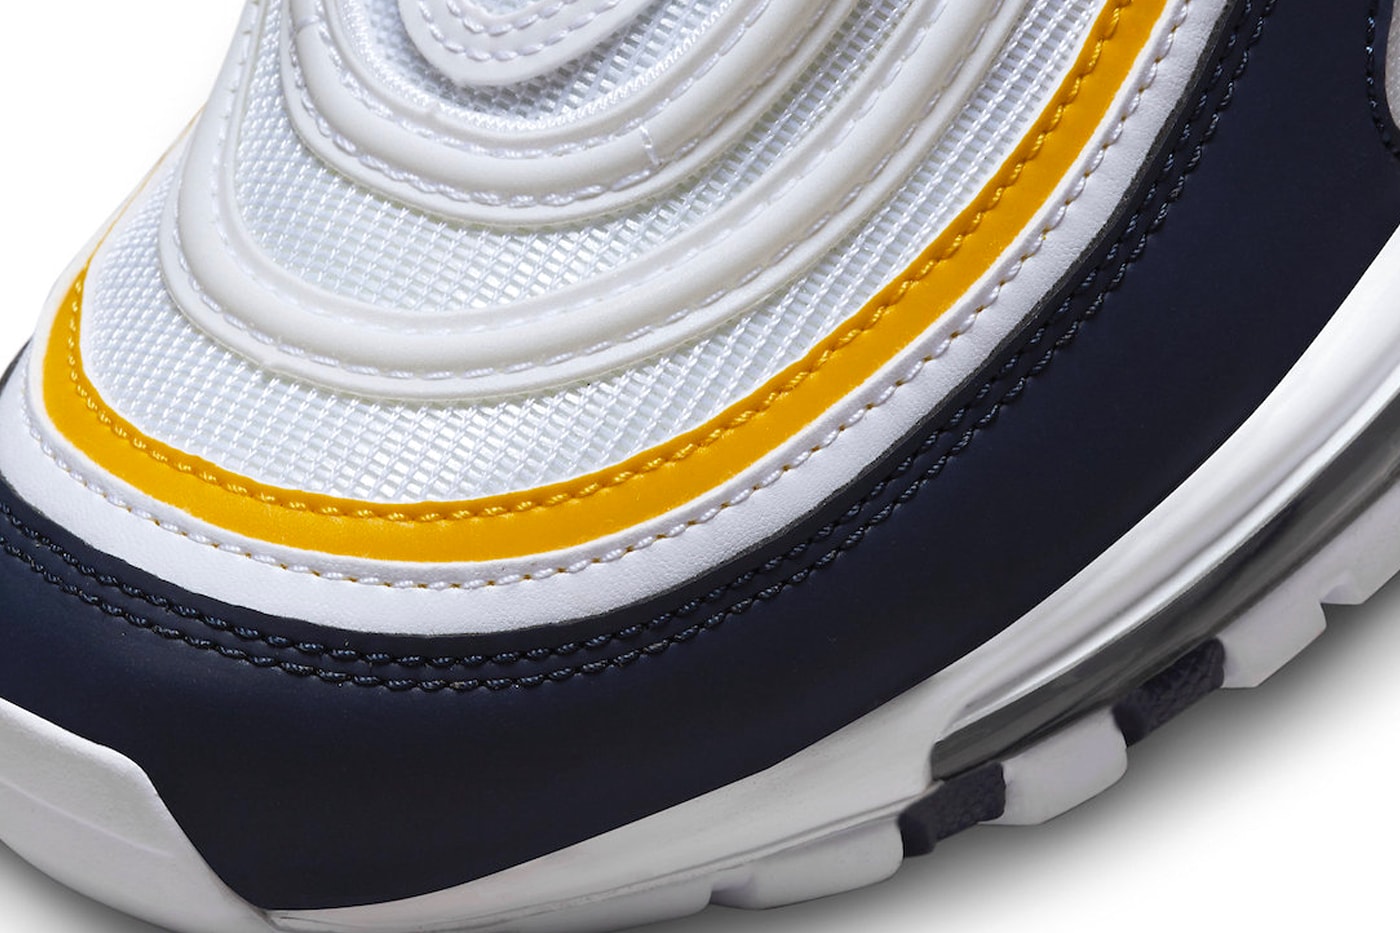 Official Look at the Nike Air Max 97 "Michigan" 921826-110 release info sneakers wardrobe staples white navy